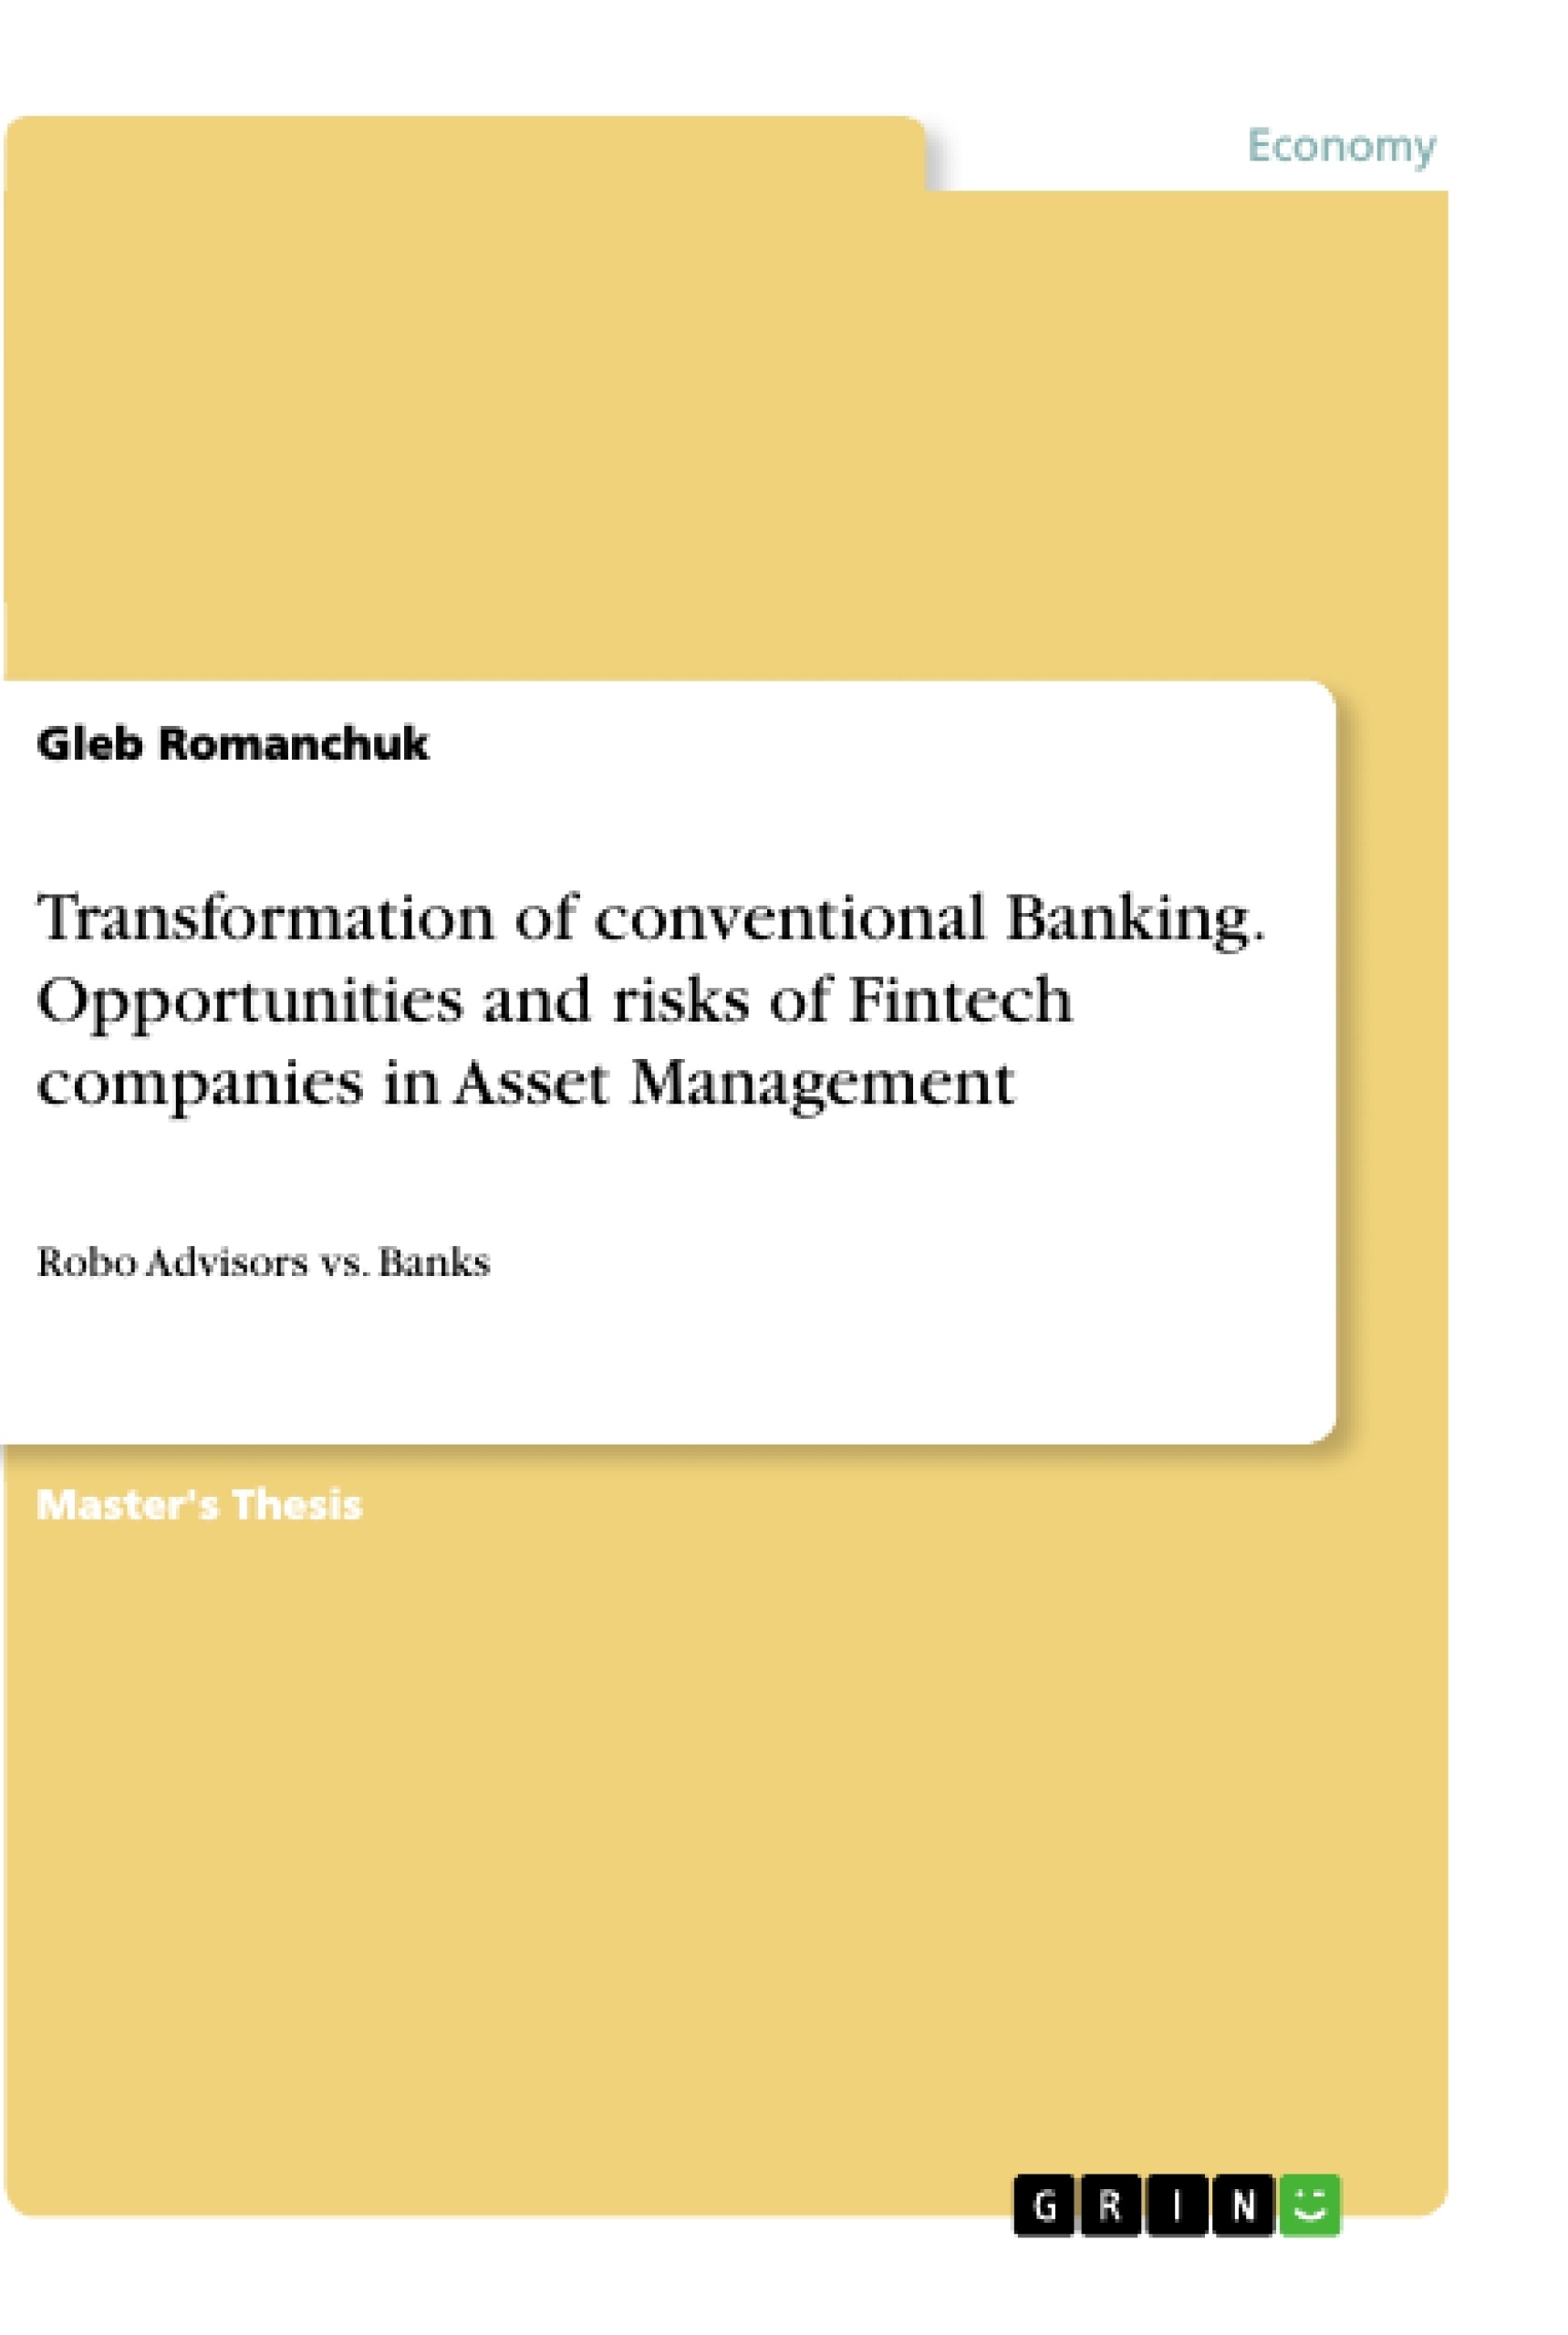 Título: Transformation of conventional Banking. Opportunities and risks of Fintech companies in Asset Management